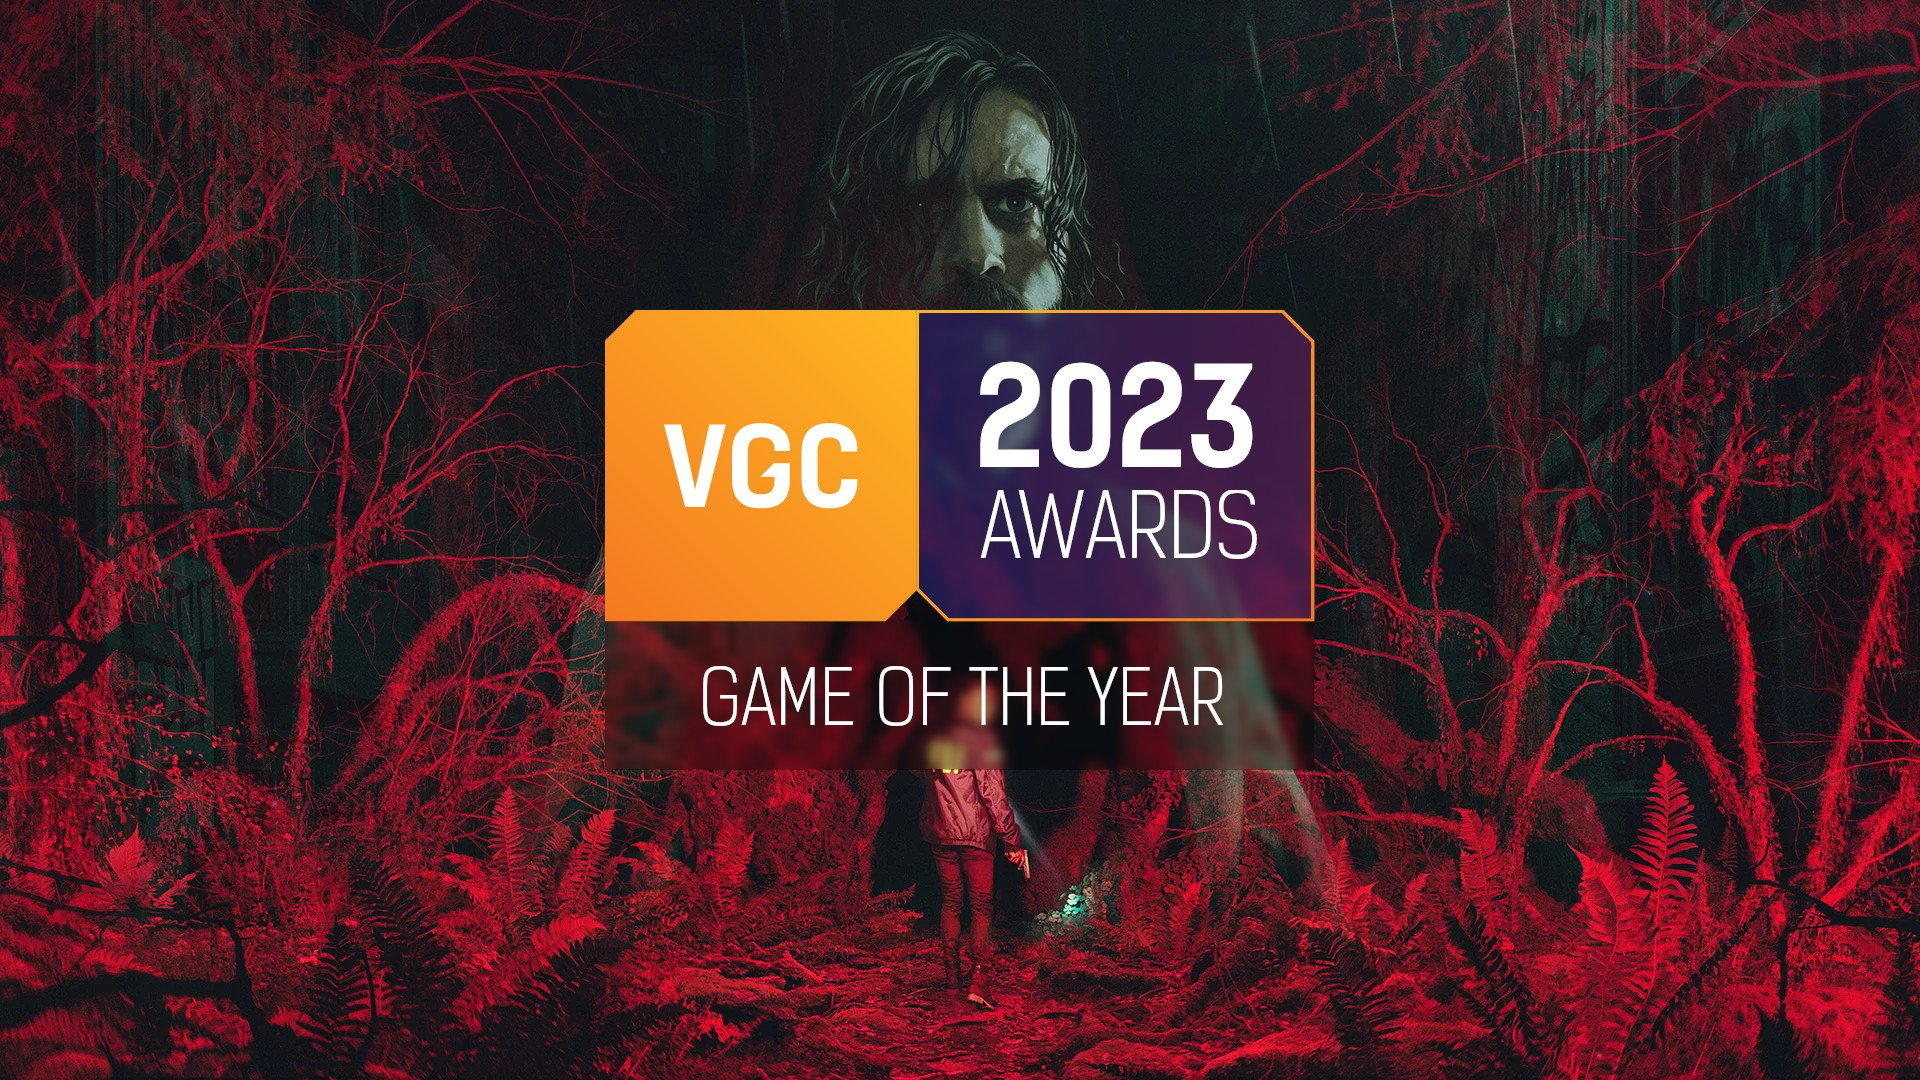 VGC game of the year 2023